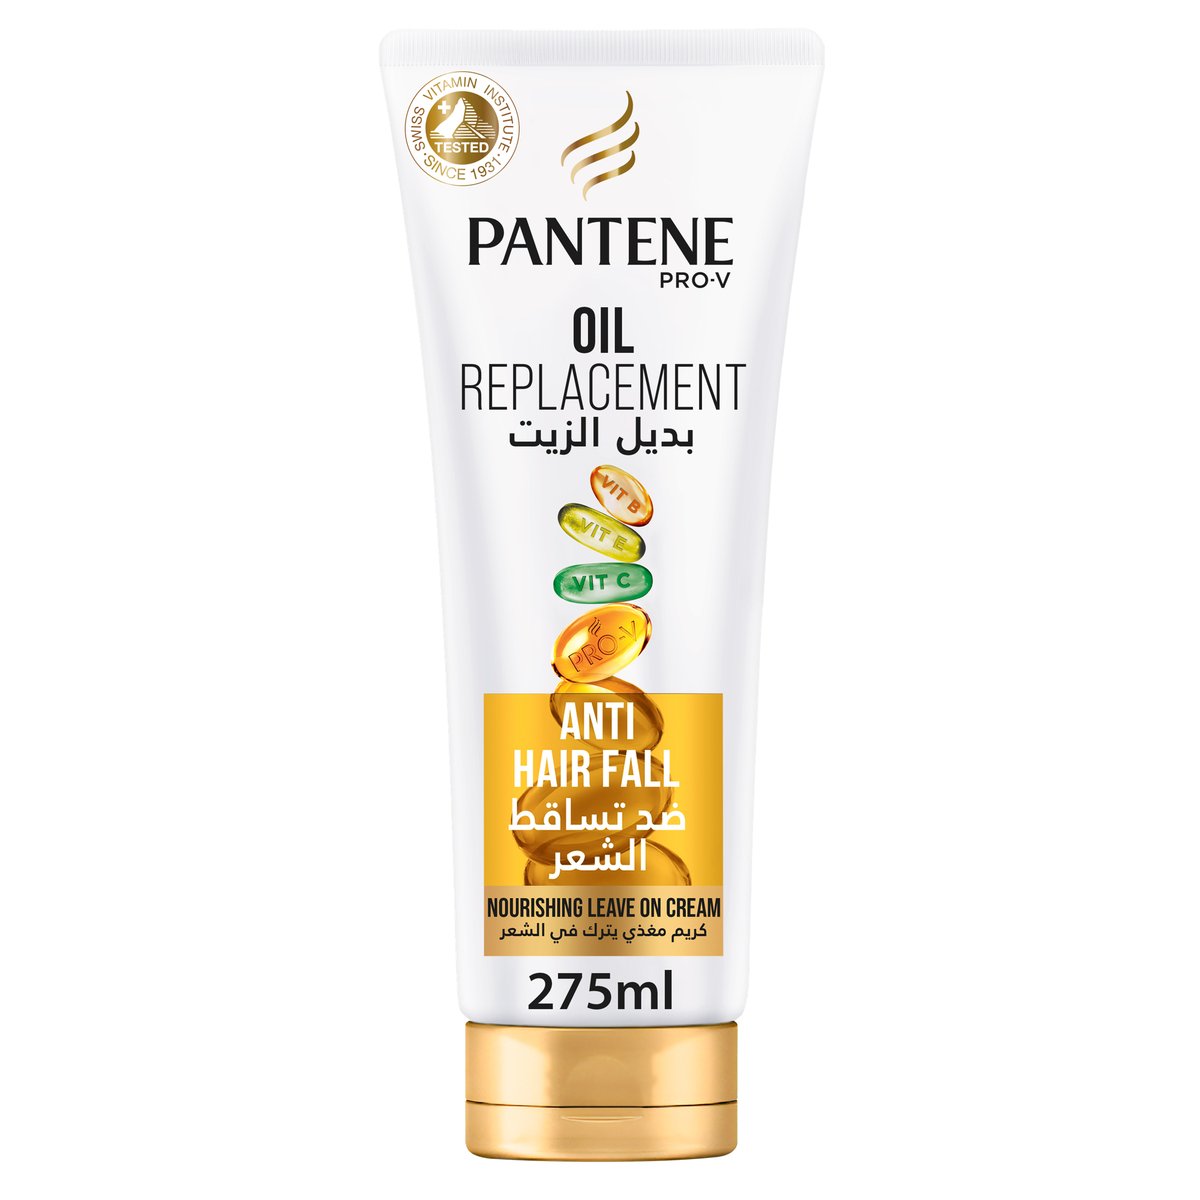 Pantene Pro-V  Hair Oil Replacement Leave On Cream  Anti-Hair Fall Value Pack 275ml